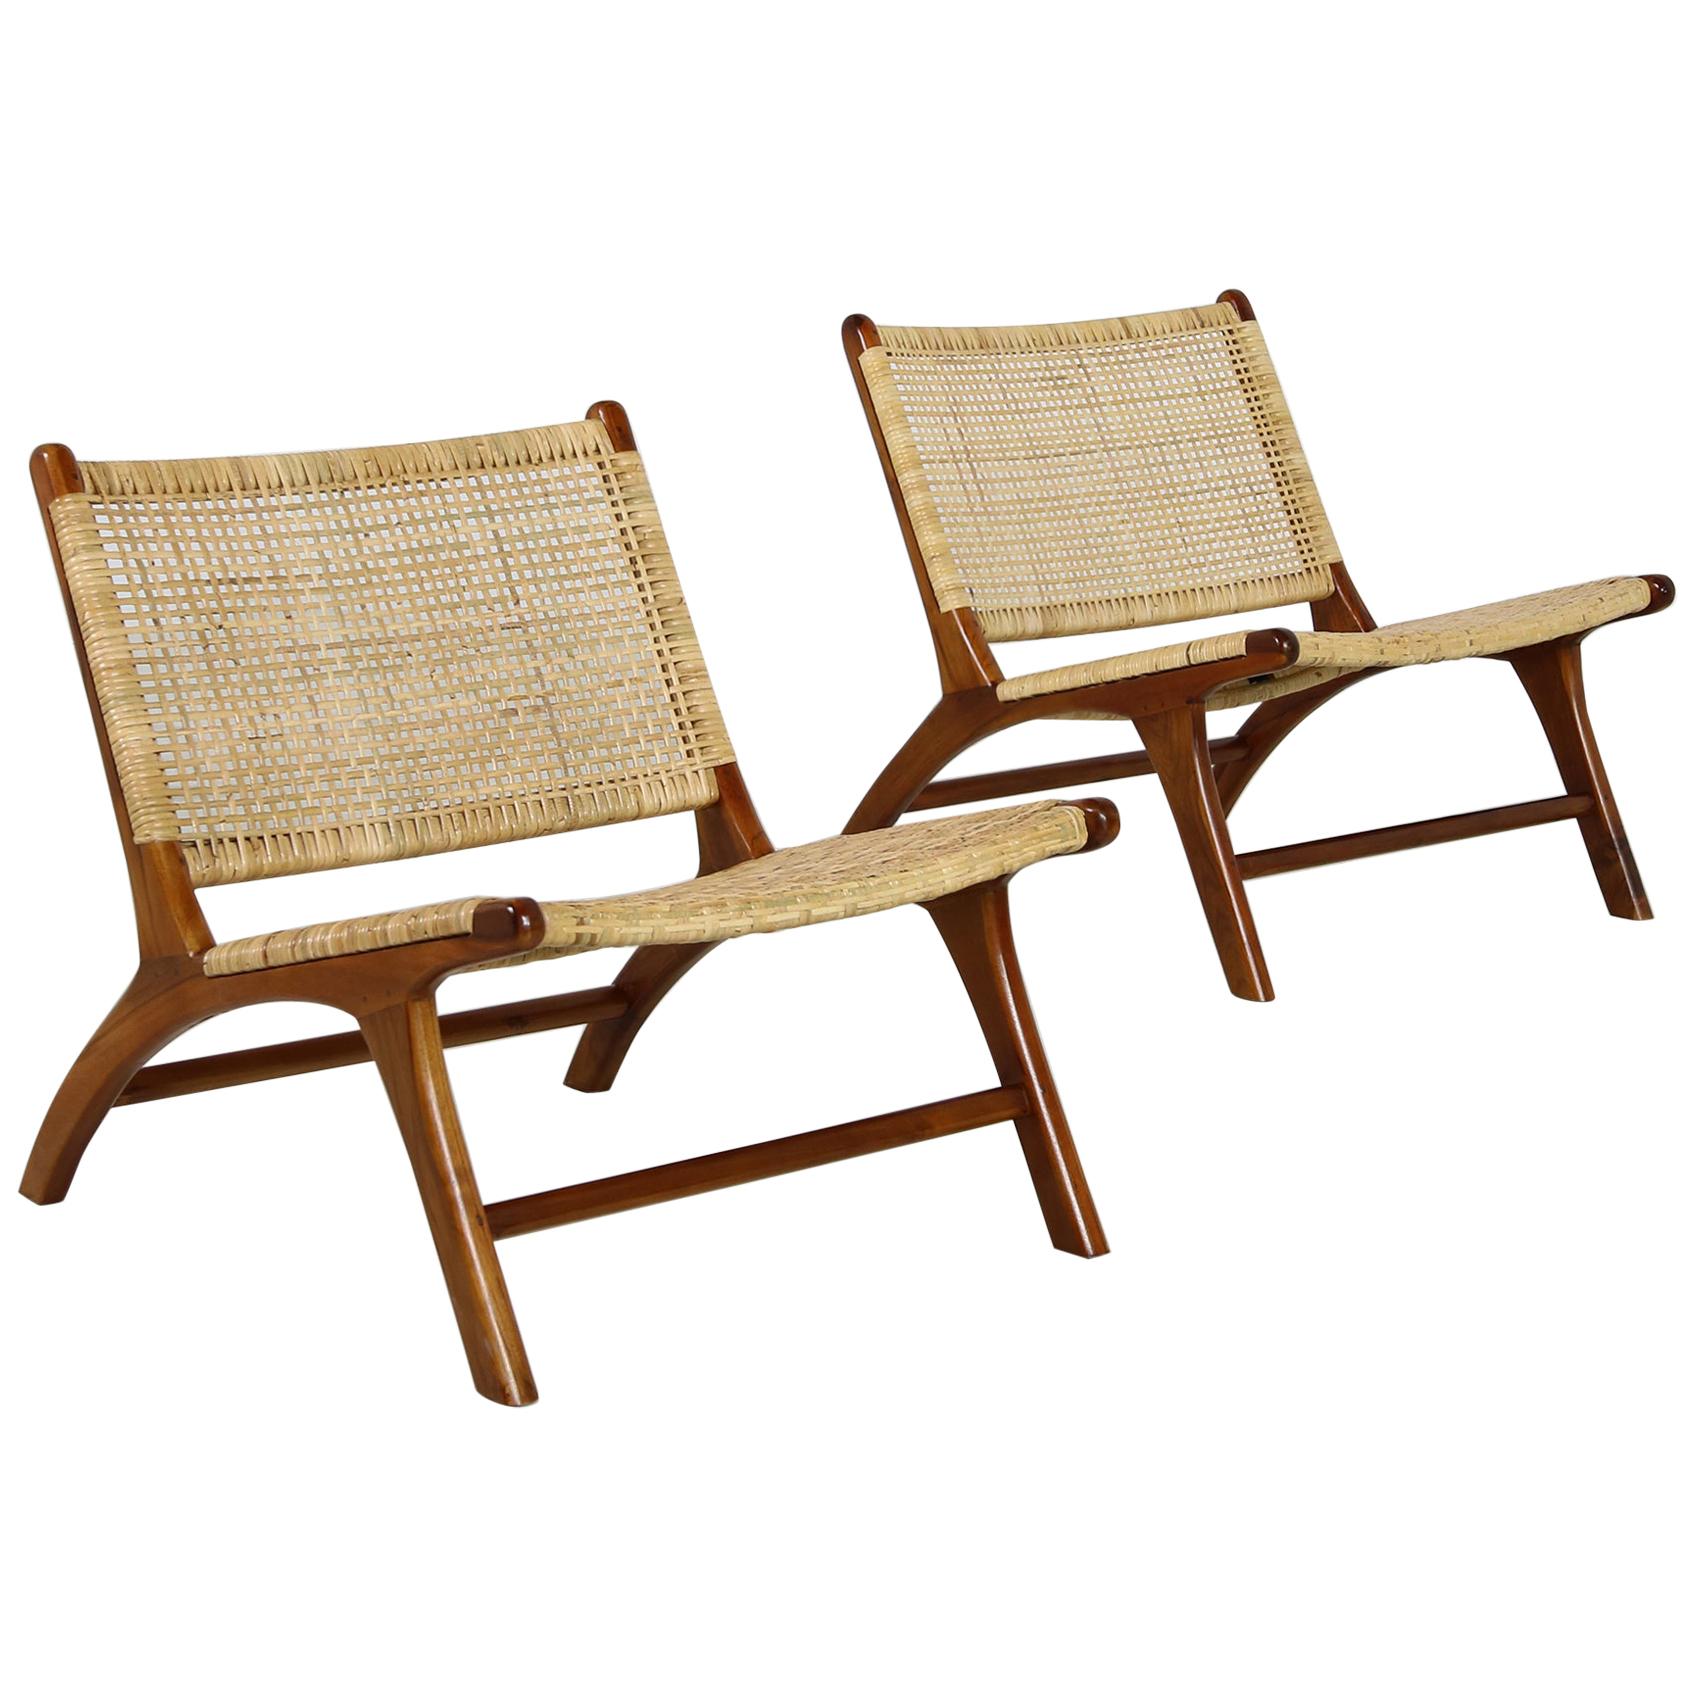 Pair of Solid Teak and Cane Lounge Chairs, Brazilian and Midcentury Style,  Modern at 1stDibs